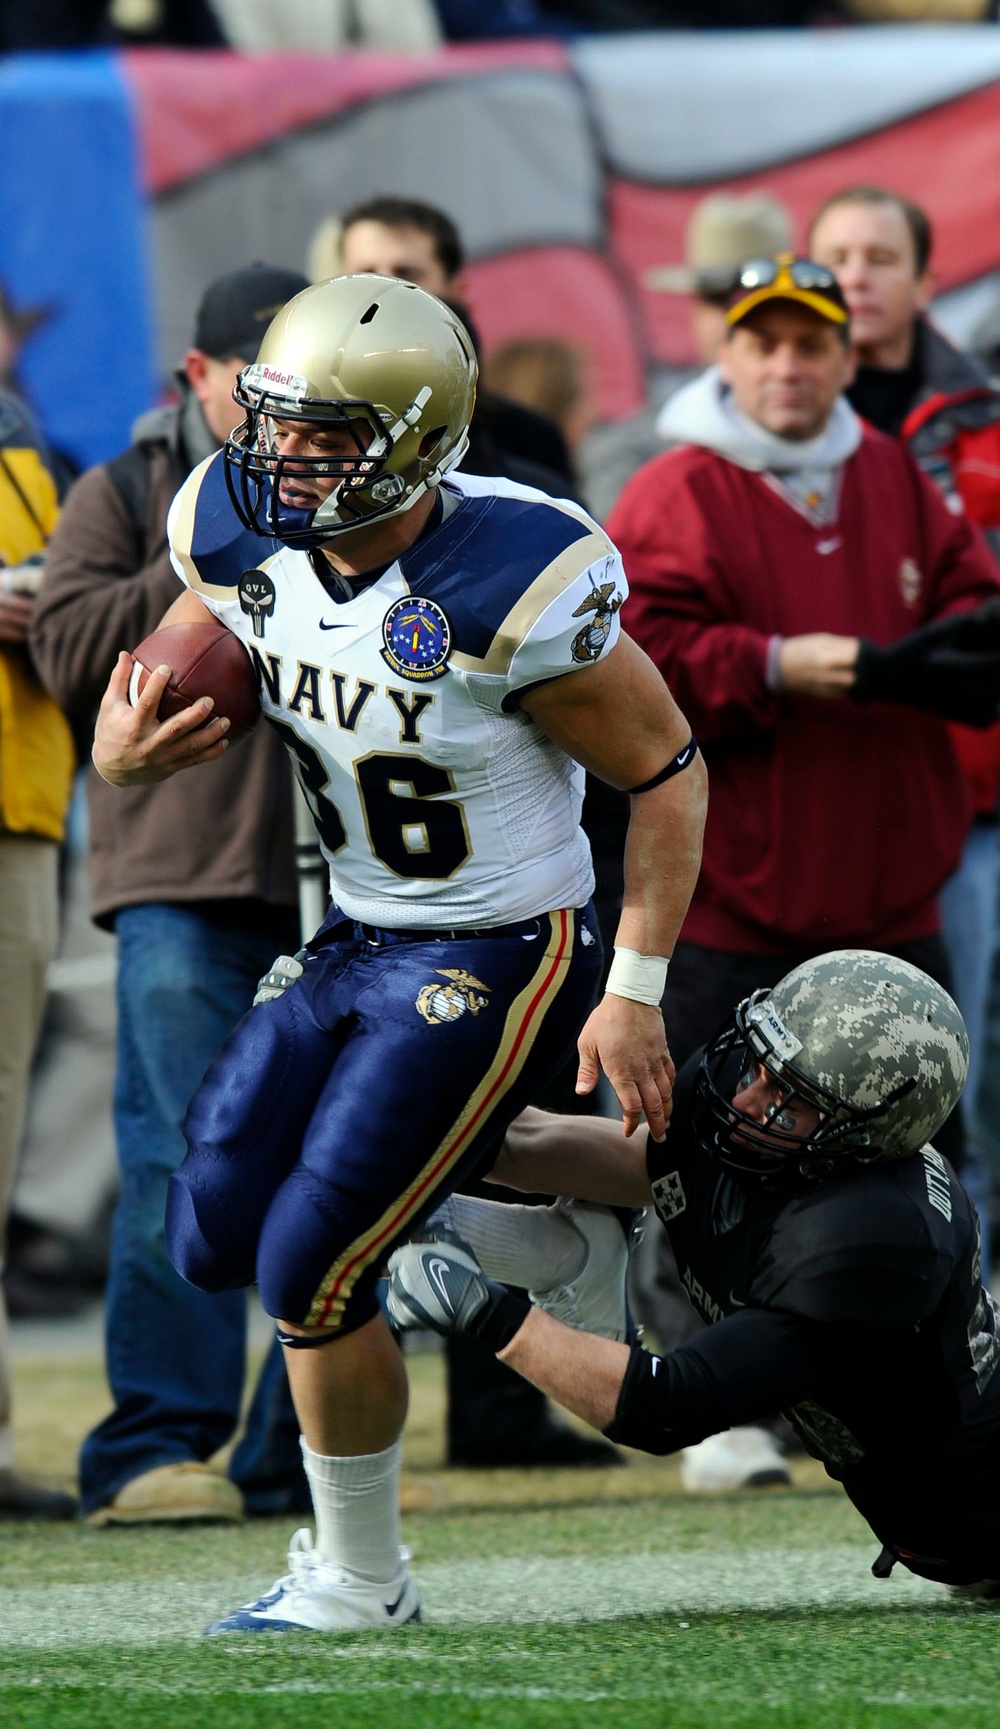 Navy runs away with it during Army-Navy game